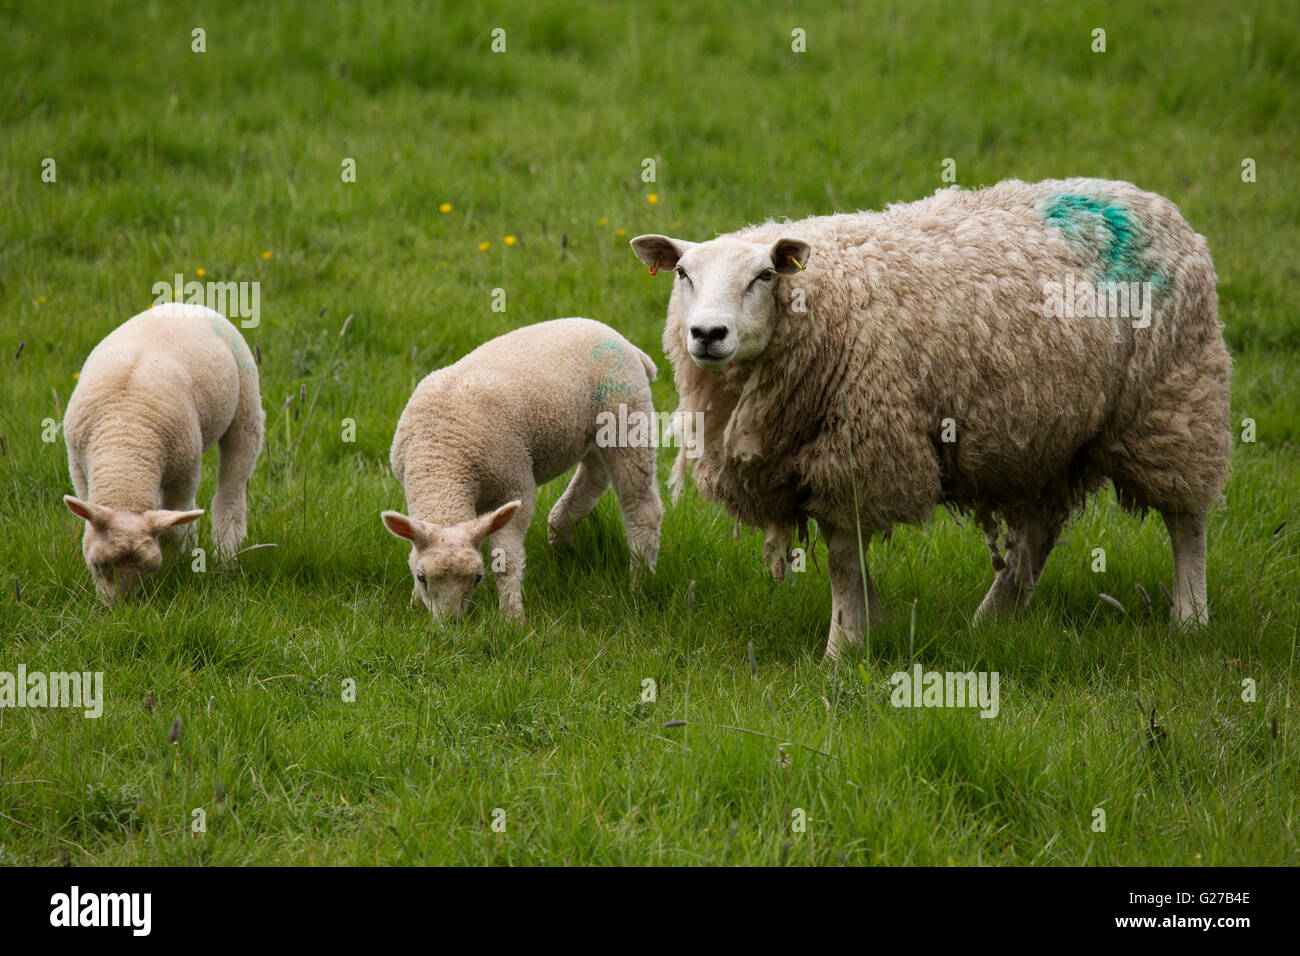 A family of sheep in Northumberland, England. A ewe stands next to her two lambs. Stock Photo